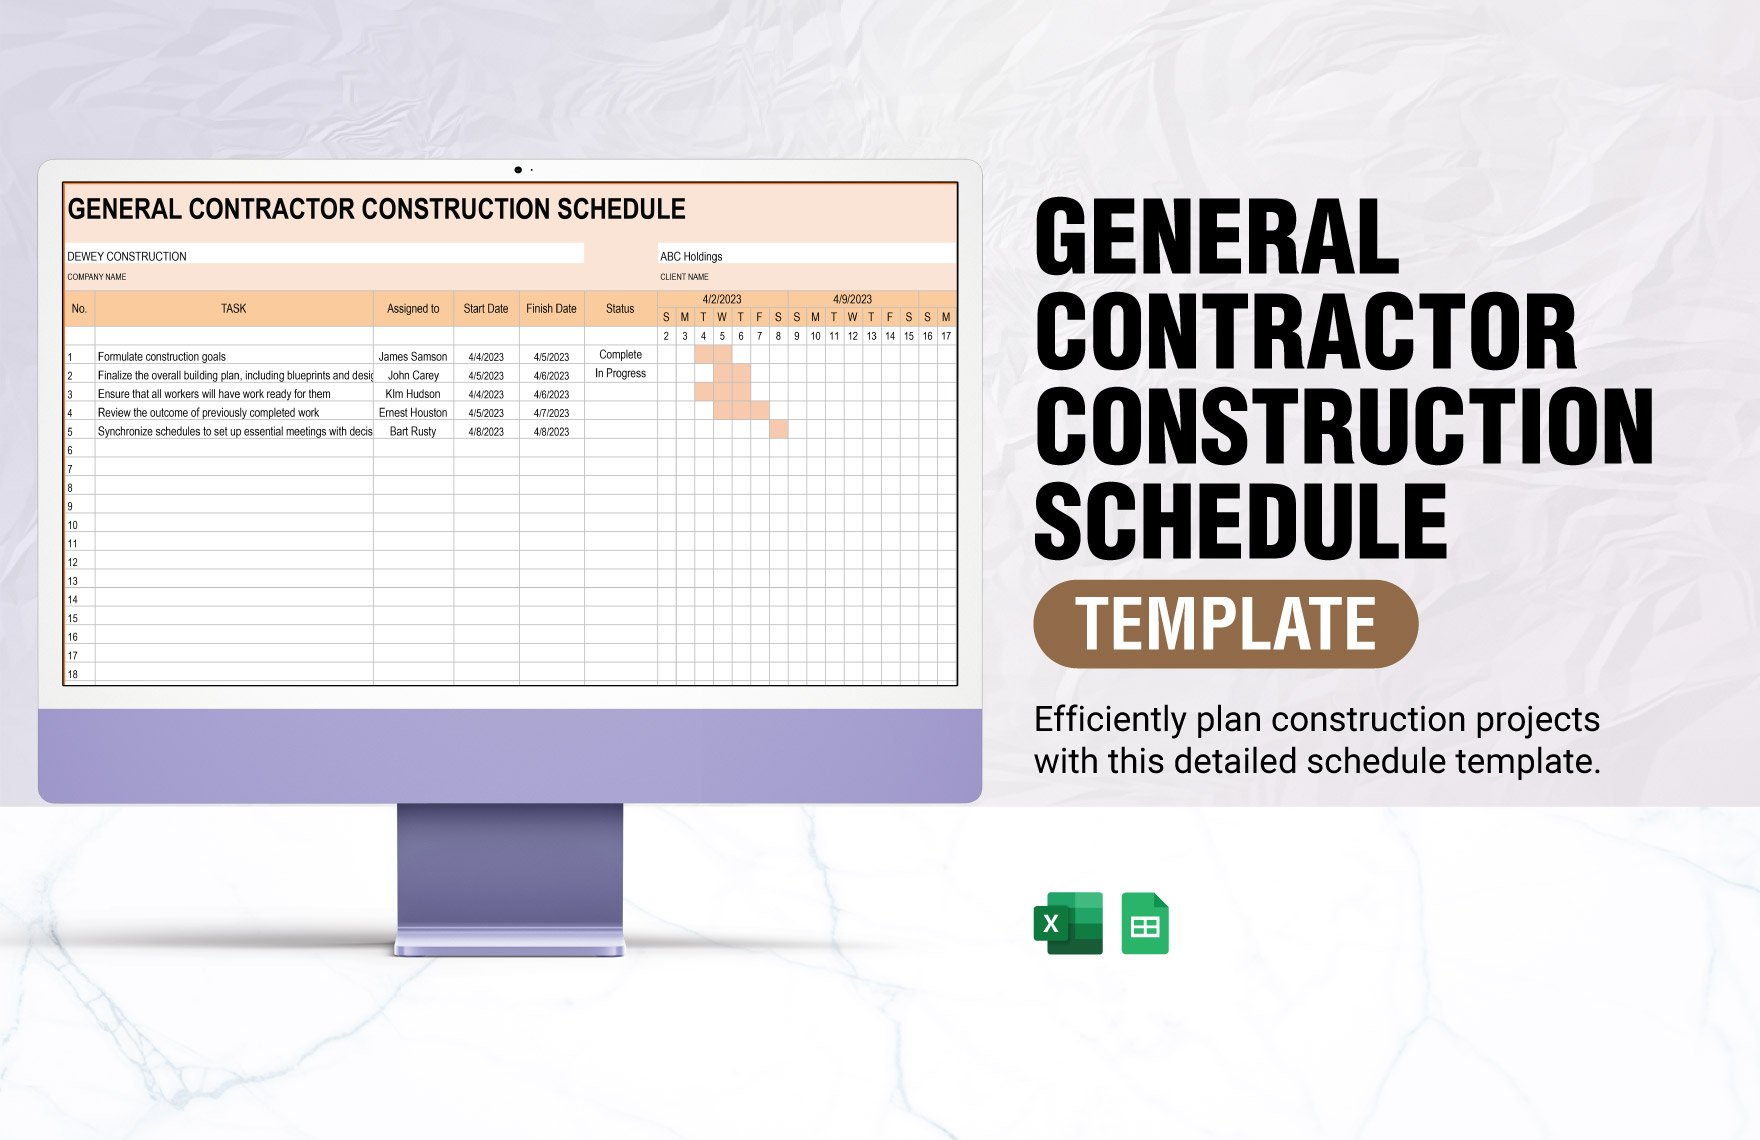 General Contractor Construction Schedule Template in Excel, Google Sheets